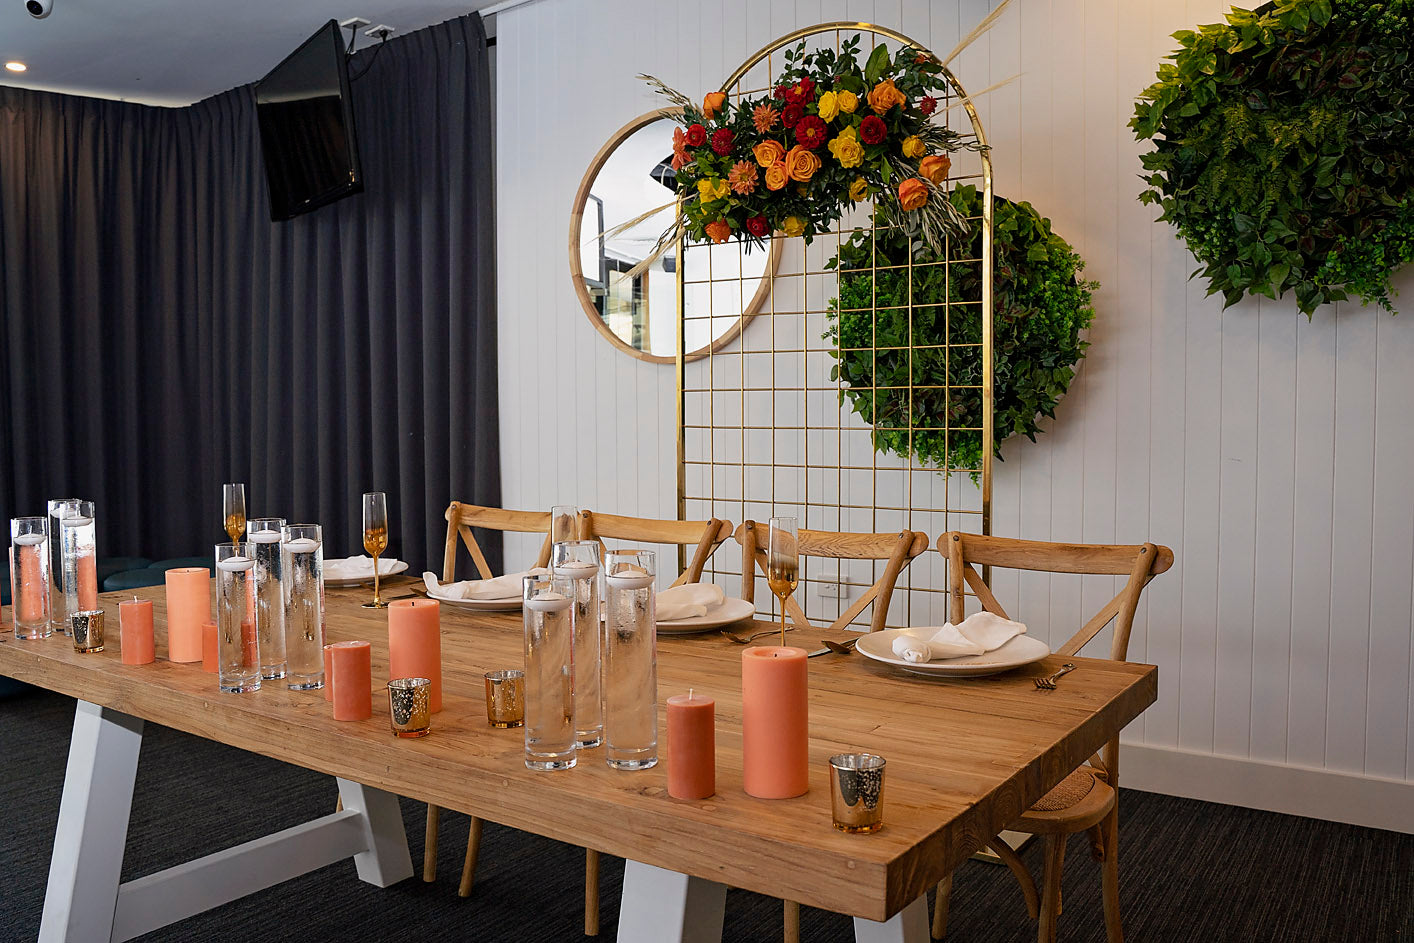 Reception styling - Simplicity